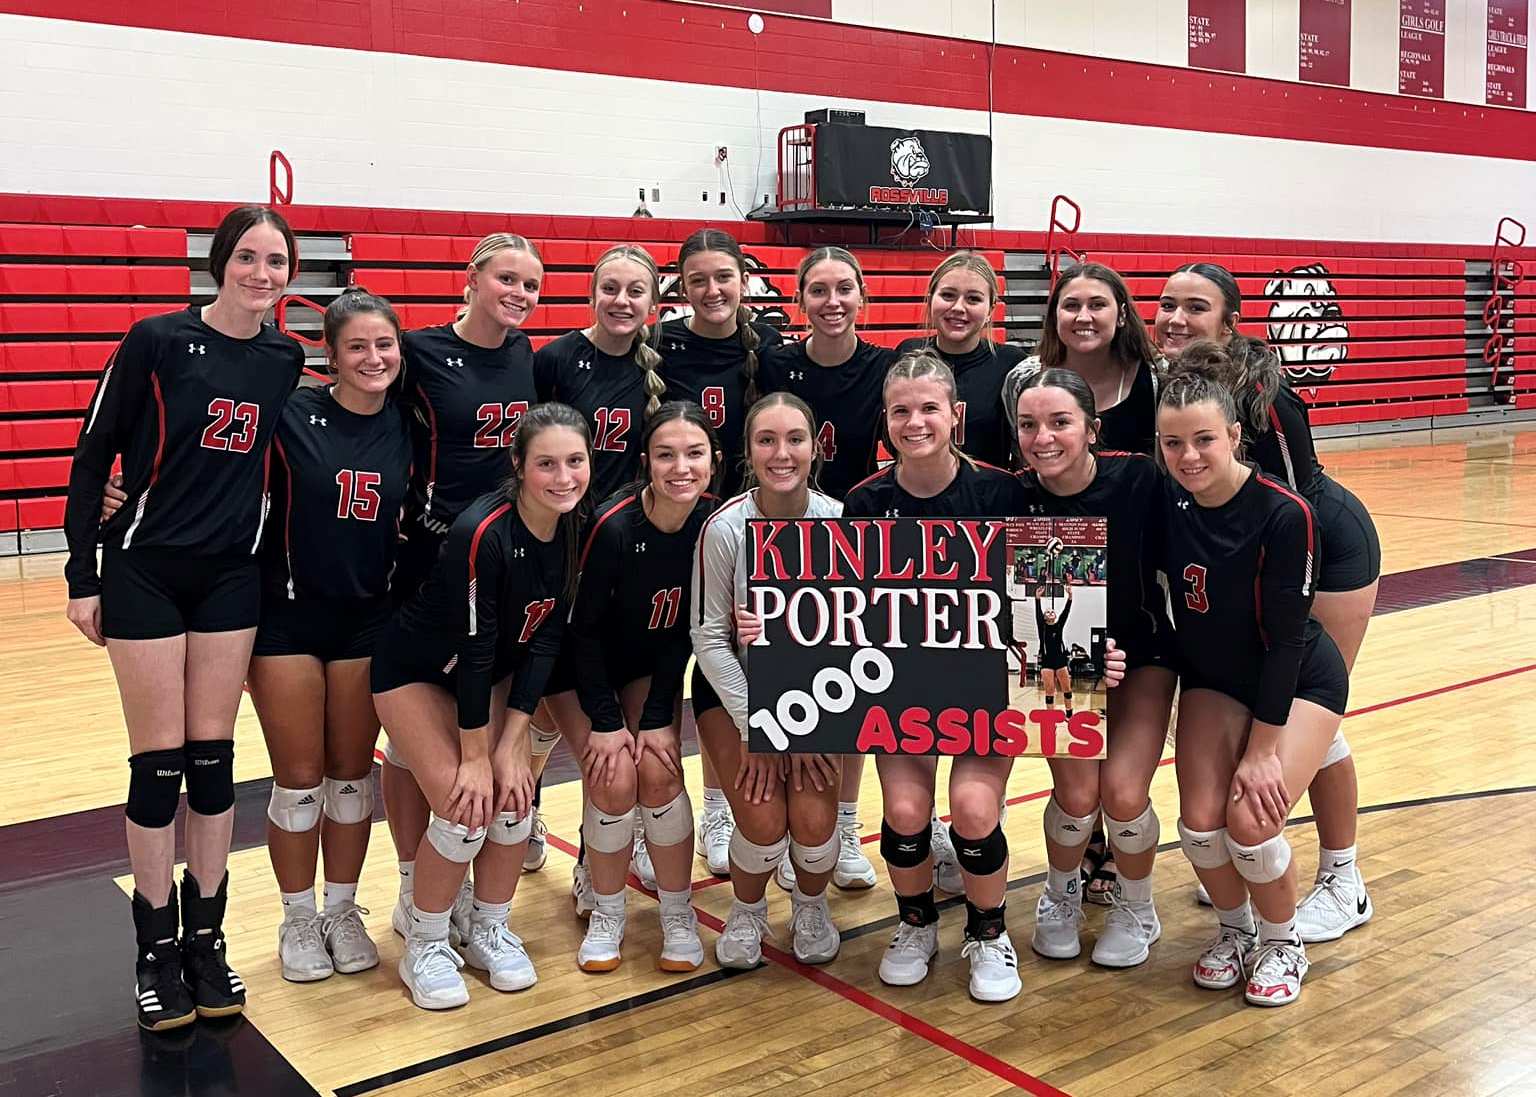 Kinley Porter 1,000 Assists